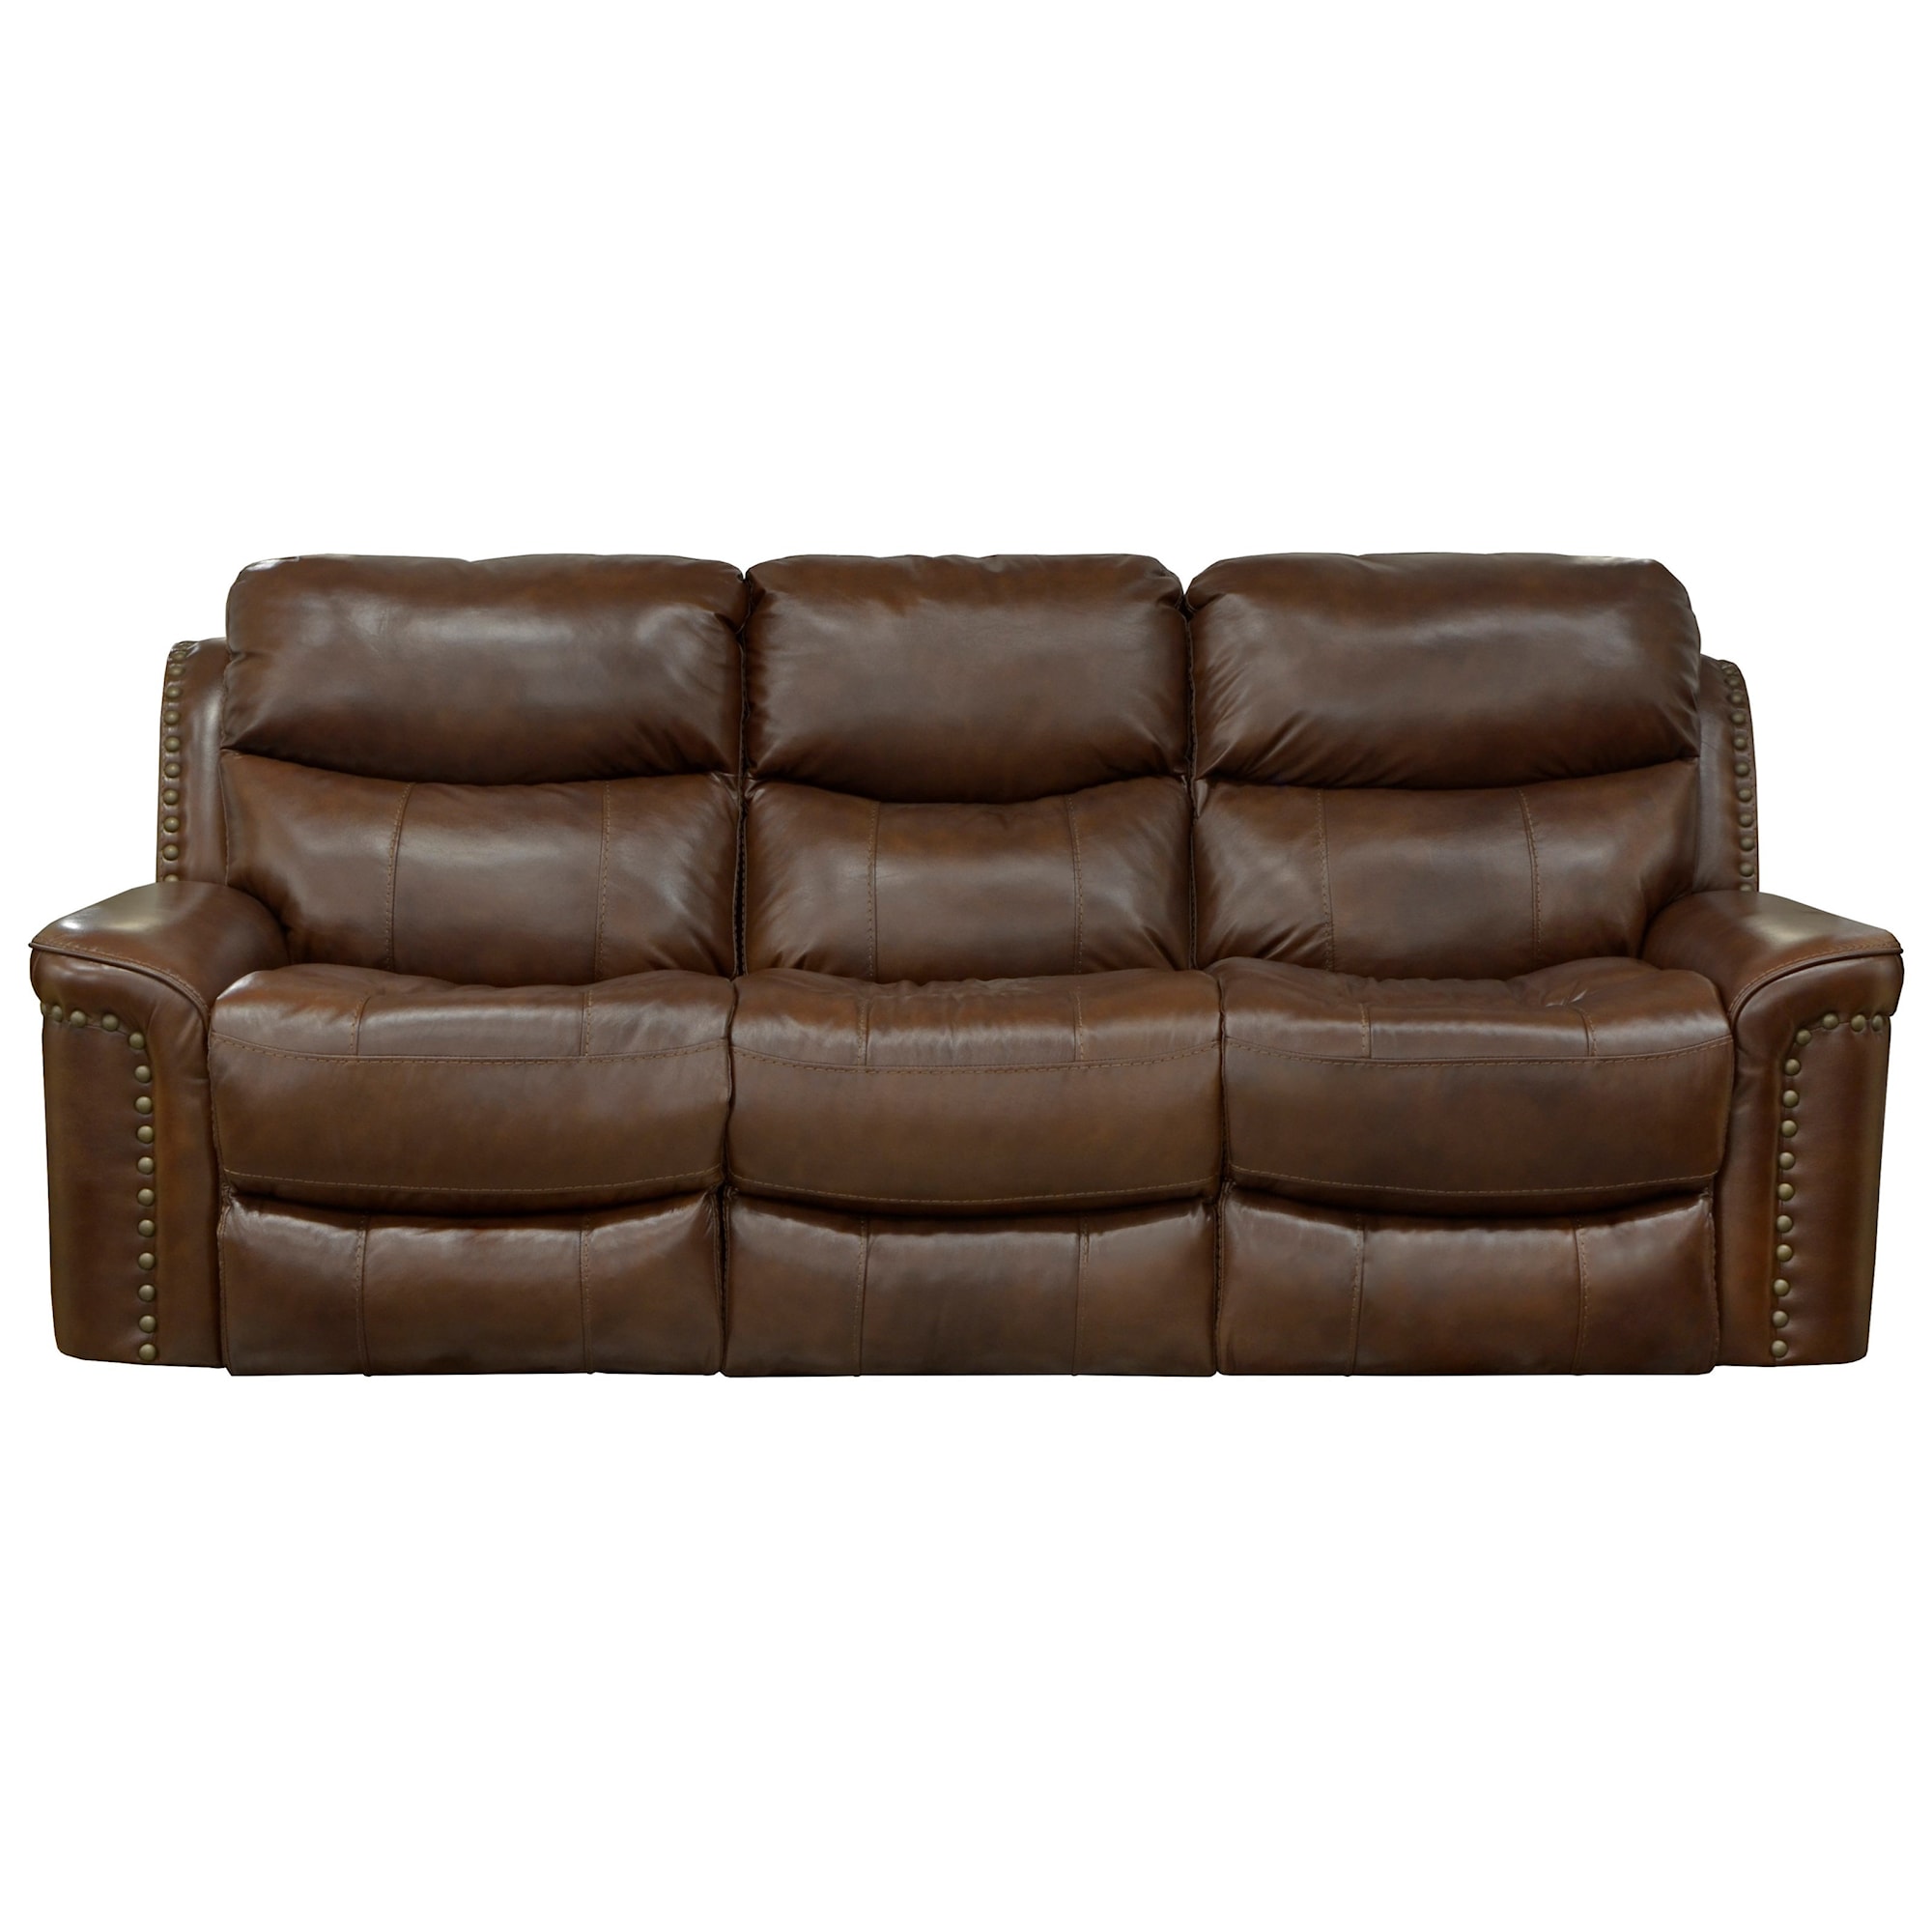 Leather Sofa Beds That Combine Style & Value